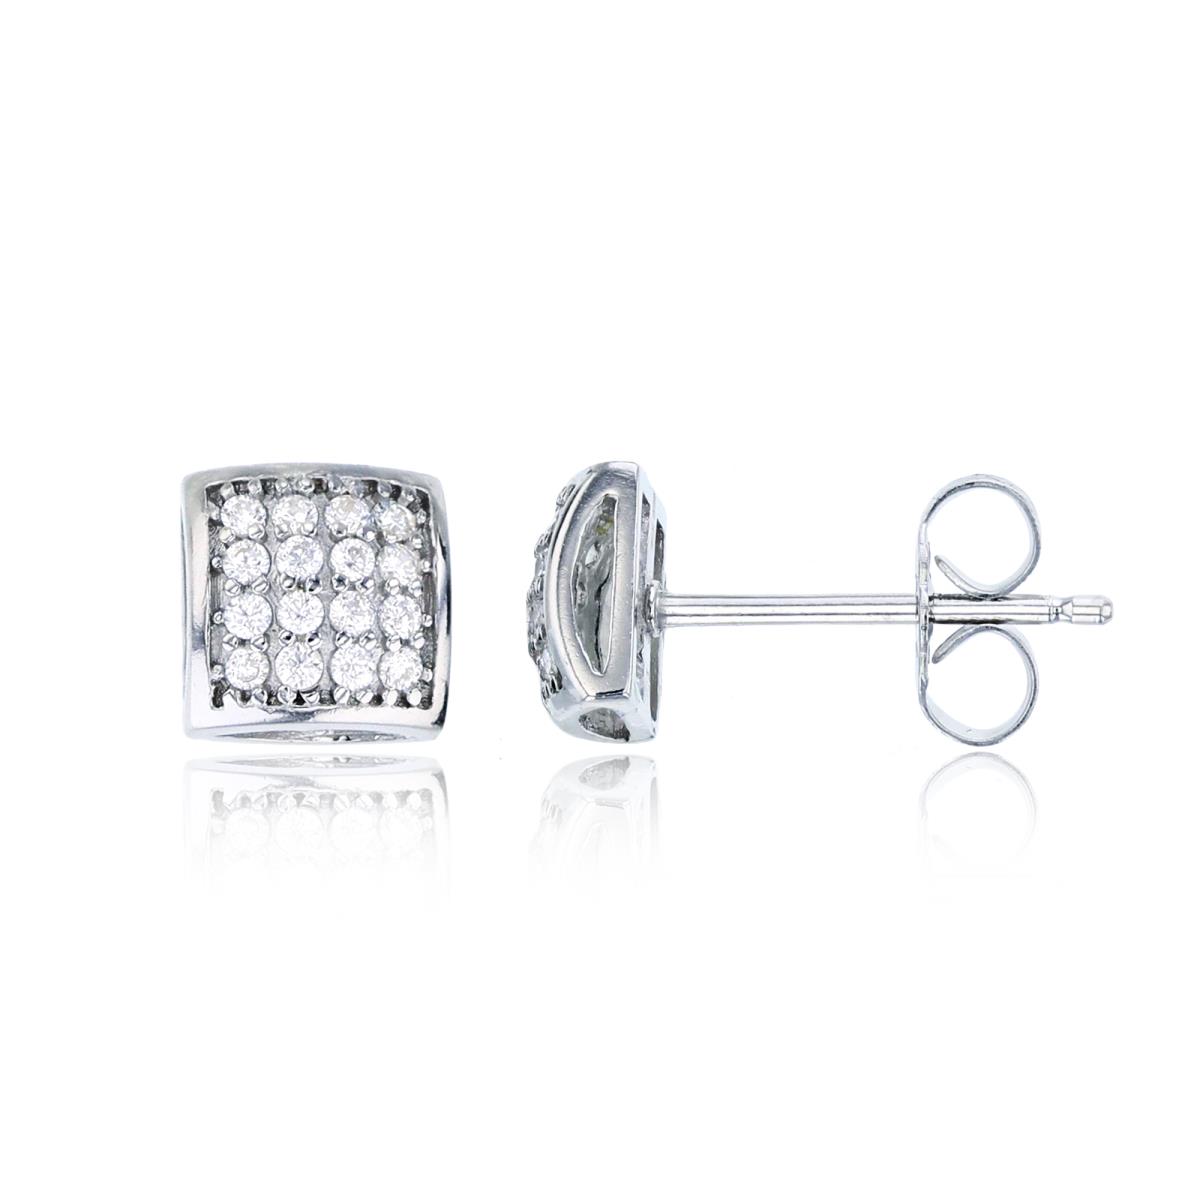 Sterling Silver 9.2x9.2mm Micropave Domed Square Stud Earring